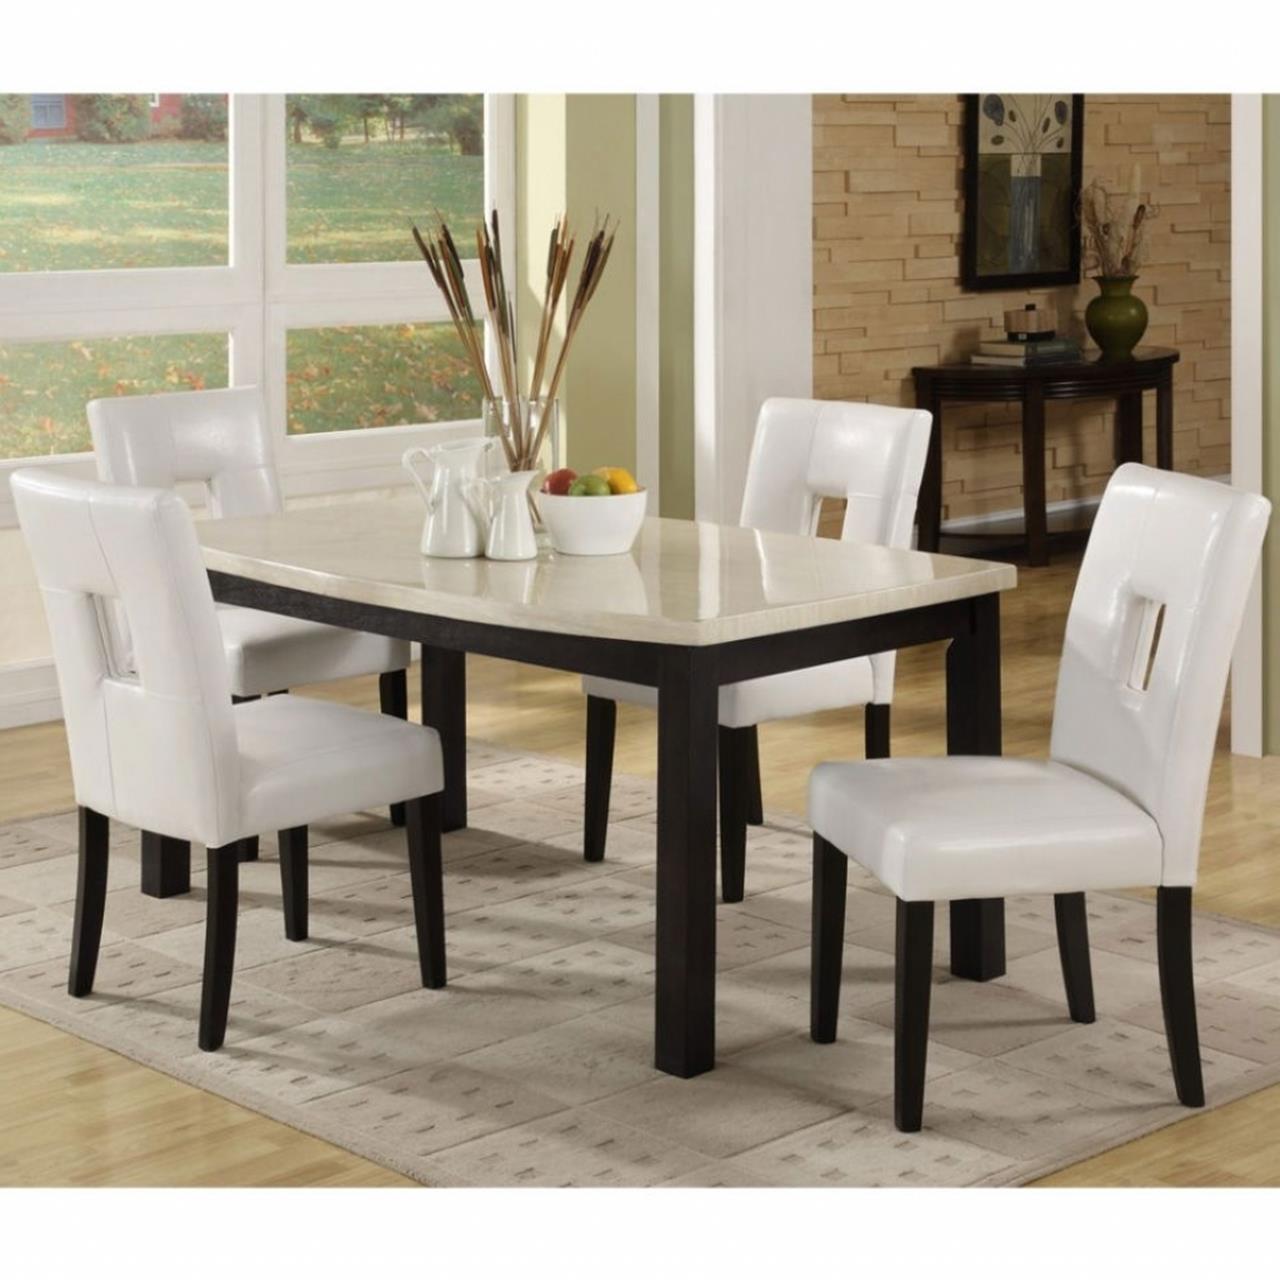 Small Kitchen Tables Sets
 Best 39 Perfect Kitchen Table Sets For Small Spaces